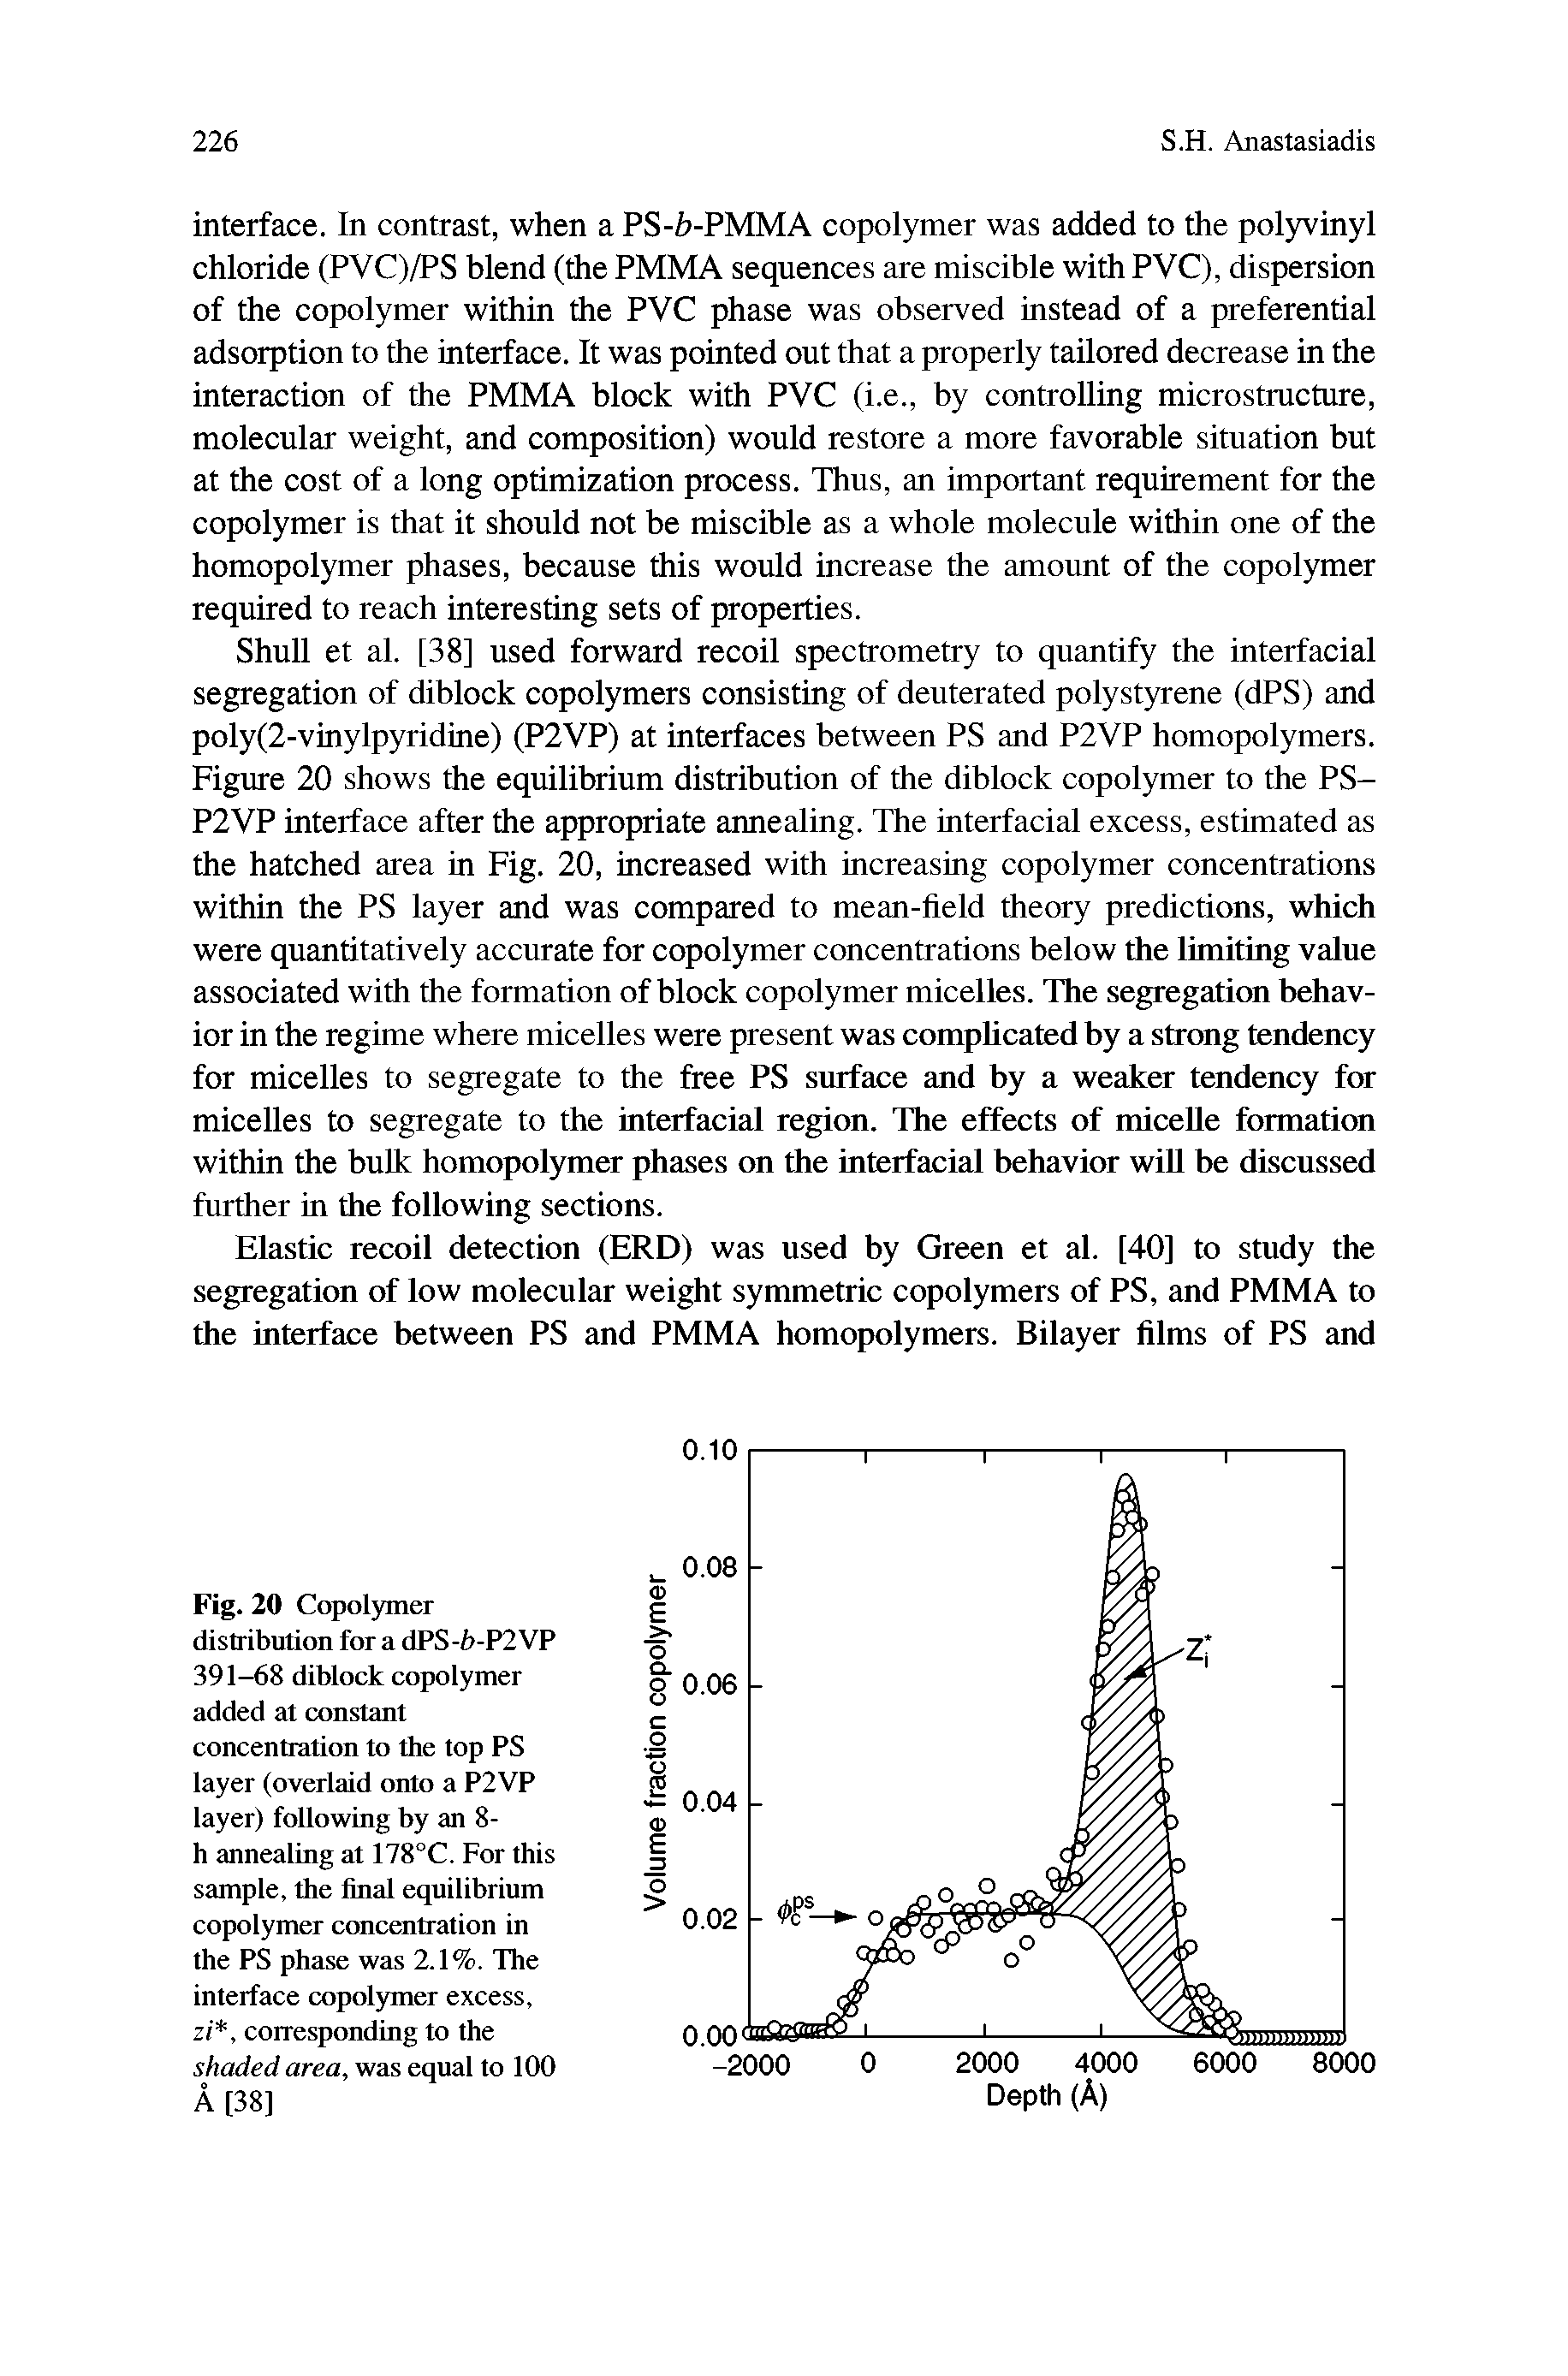 Fig. 20 Copolymer distribution for a dPS-b-P2VP 391-68 diblock copolymer added at constant concentration to the top PS layer (overlaid onto a P2VP layer) following by an 8-h annealing at 178°C. For this sample, the final equilibrium copolymer concentration in the PS phase was 2.1%. The interface copolymer excess, z(, corresponding to the shaded area, was equal to 100...